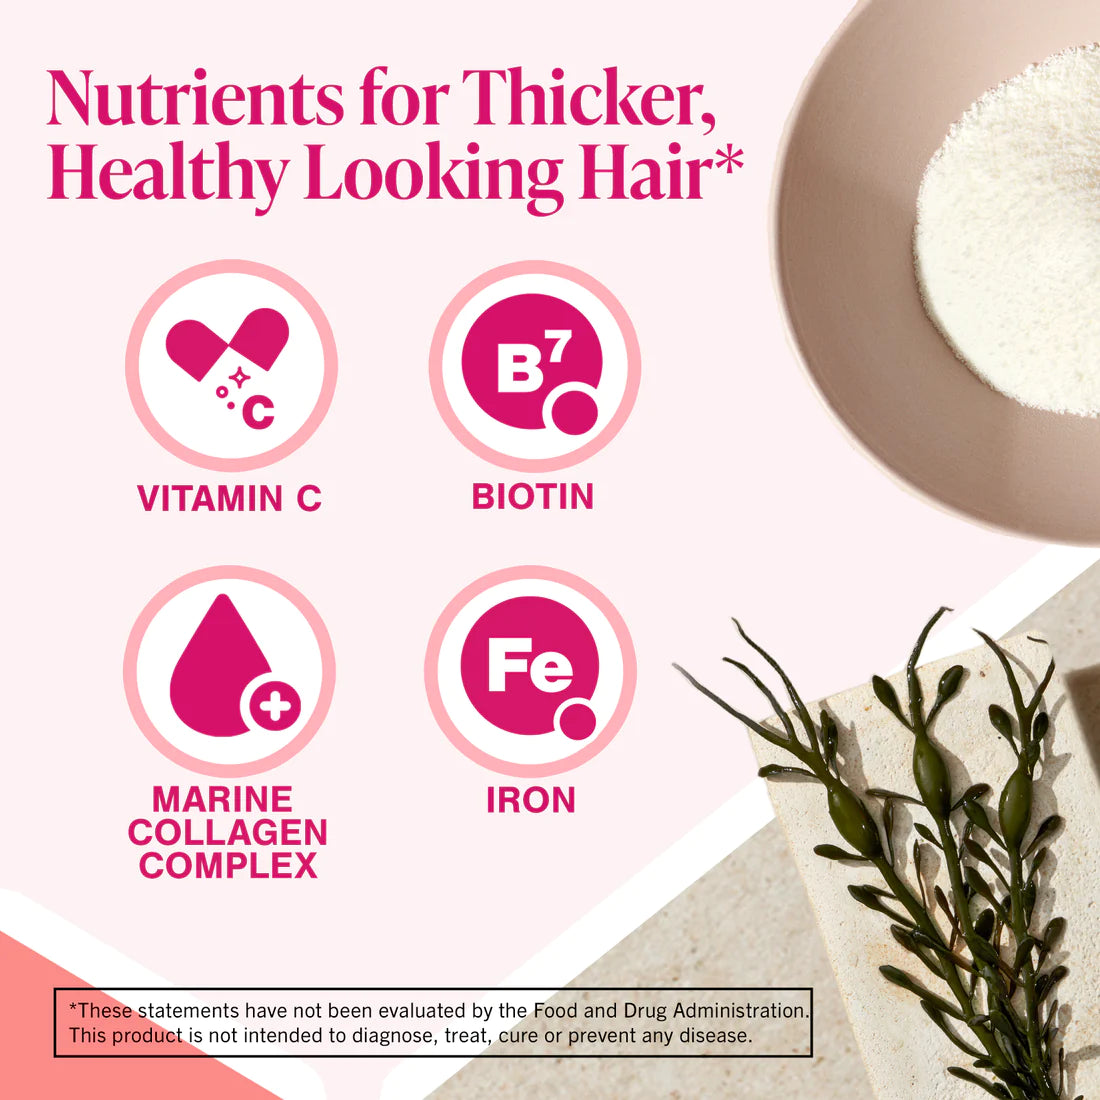 nutrients for thicker, healthy looking hair, vitamin c, biotin, marine collagen complex, and iron